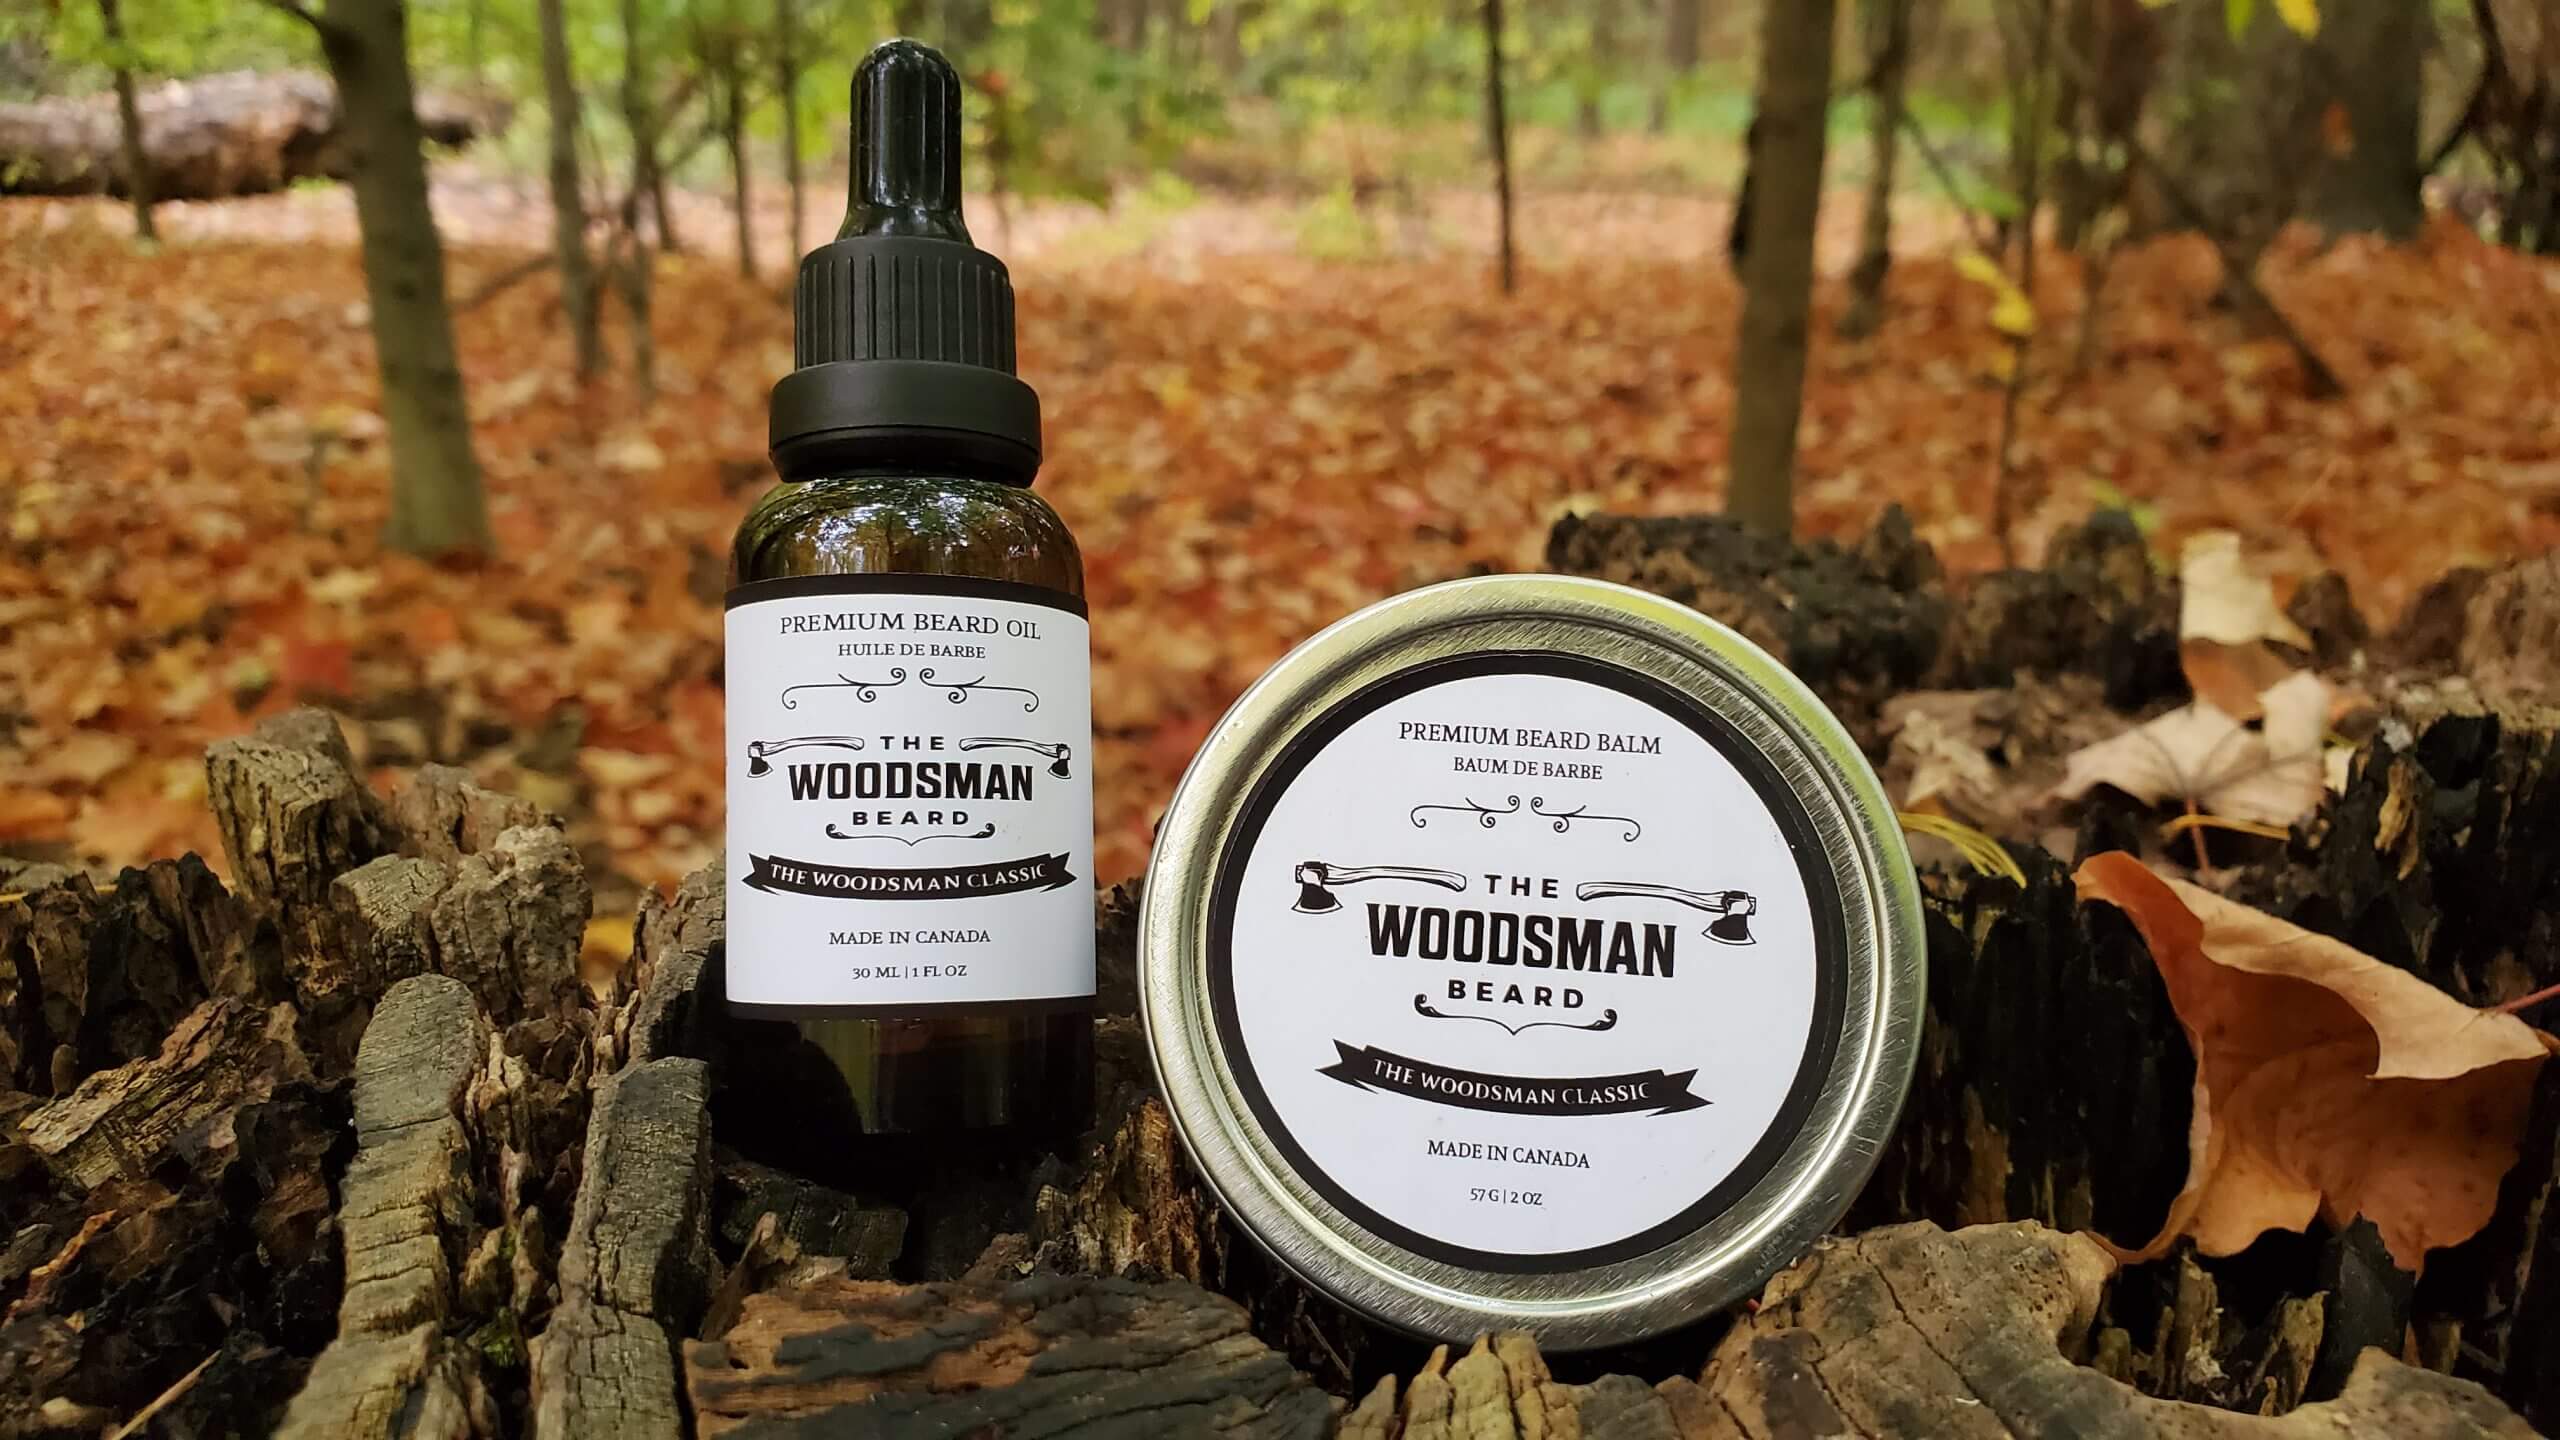 The Woodsman Beard Launches Balms & Oils For The Perfect Beard: Founder Bobby Dhillon.